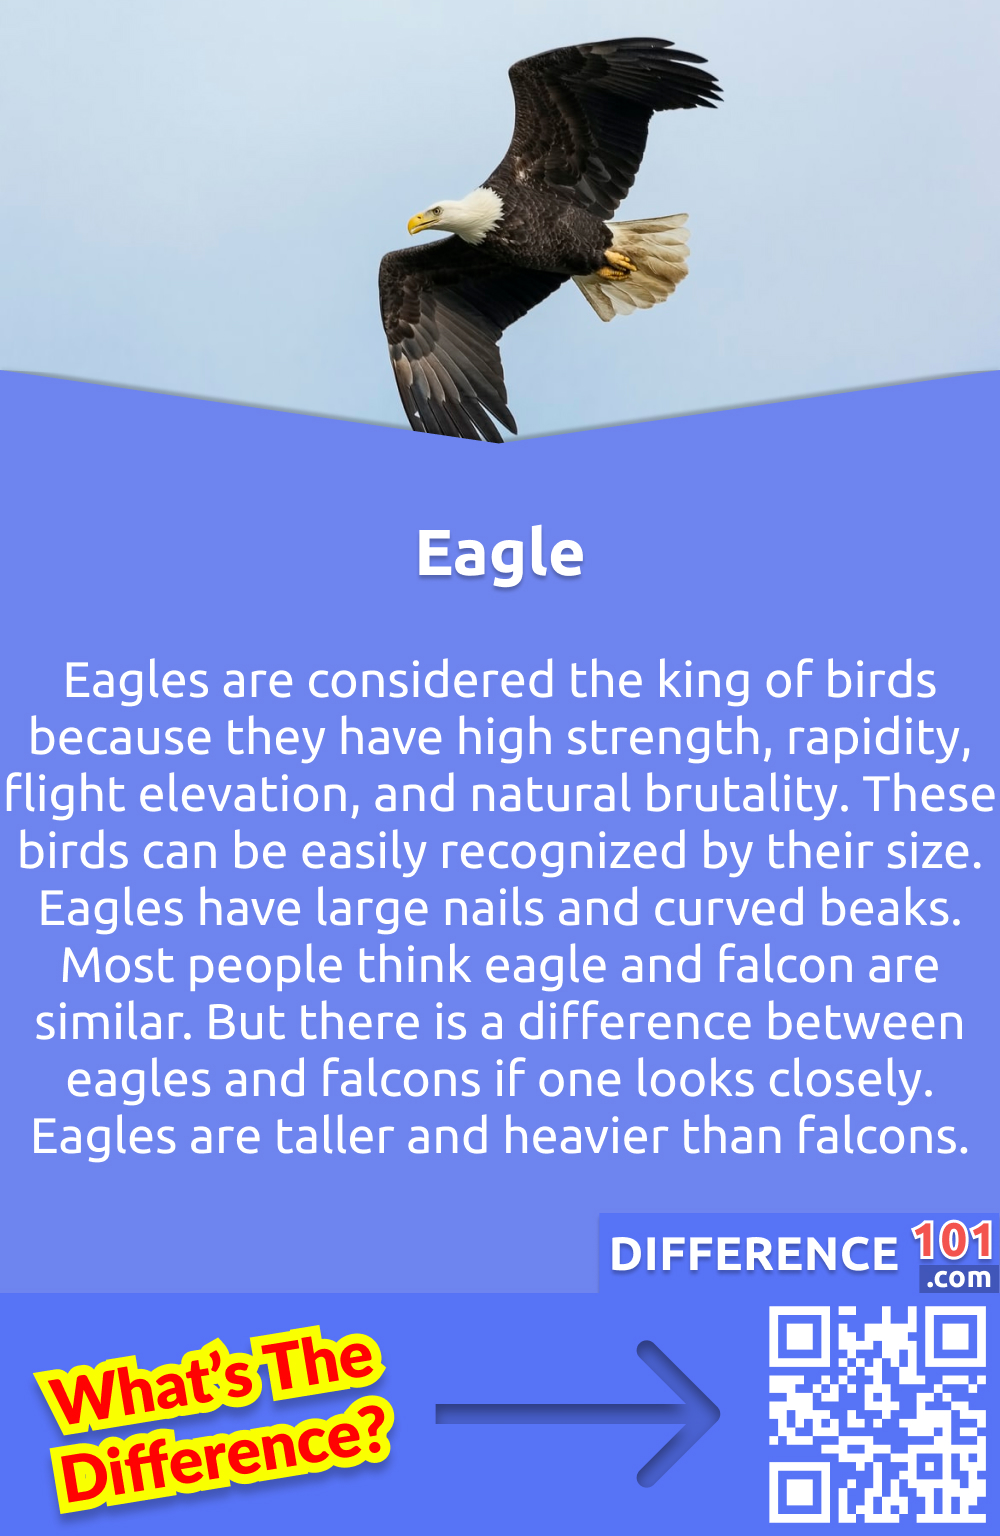 What is Eagle? Eagles are considered the king of birds because they have high strength, rapidity, flight elevation, and natural brutality. These birds can be easily recognized by their size. Eagles have large nails and curved beaks. Most people think eagle and falcon are similar. But there is a difference between eagles and falcons if one looks closely. Eagles are taller and heavier than falcons.